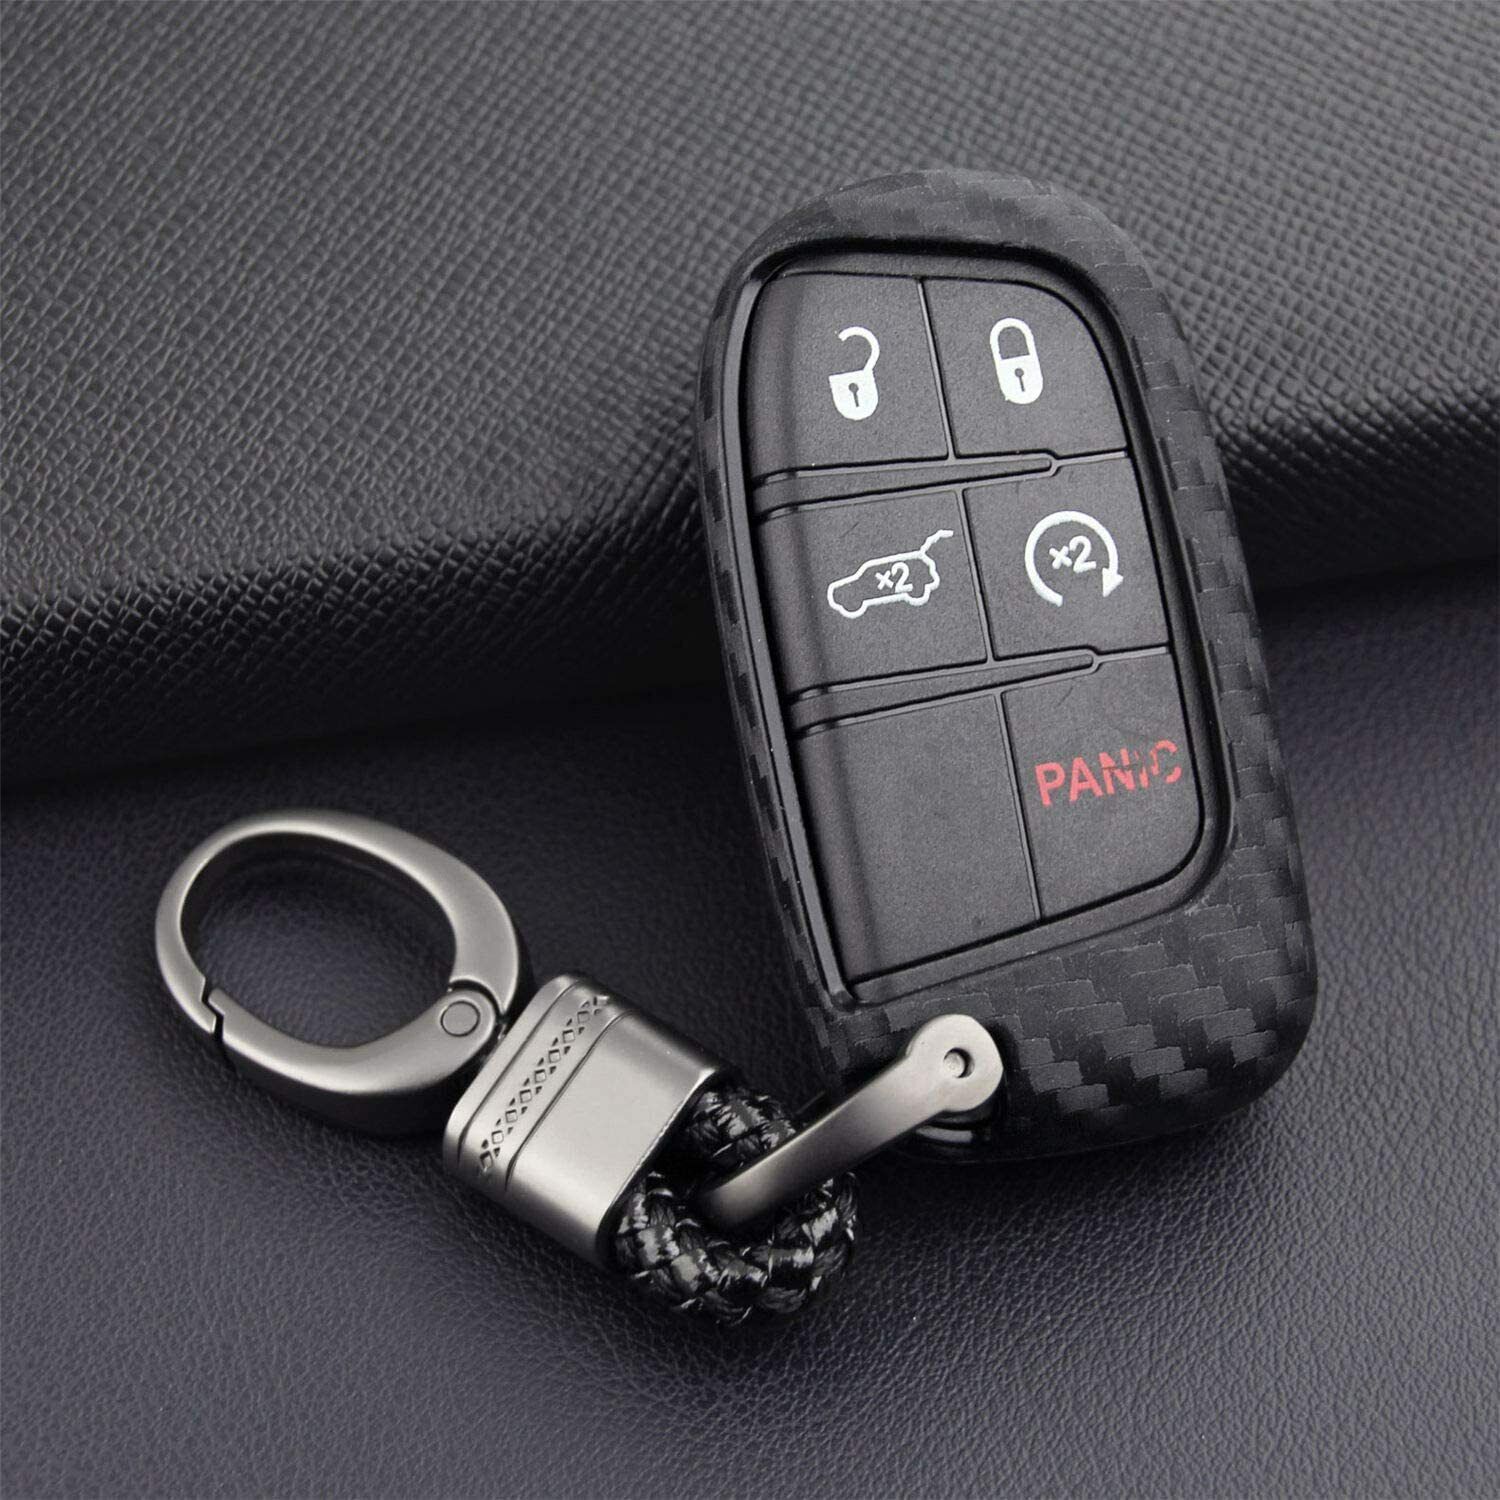 Accessories Cover Case Ring For Dodge Chrysler Jeep Carbon Fiber Key Fob Chain